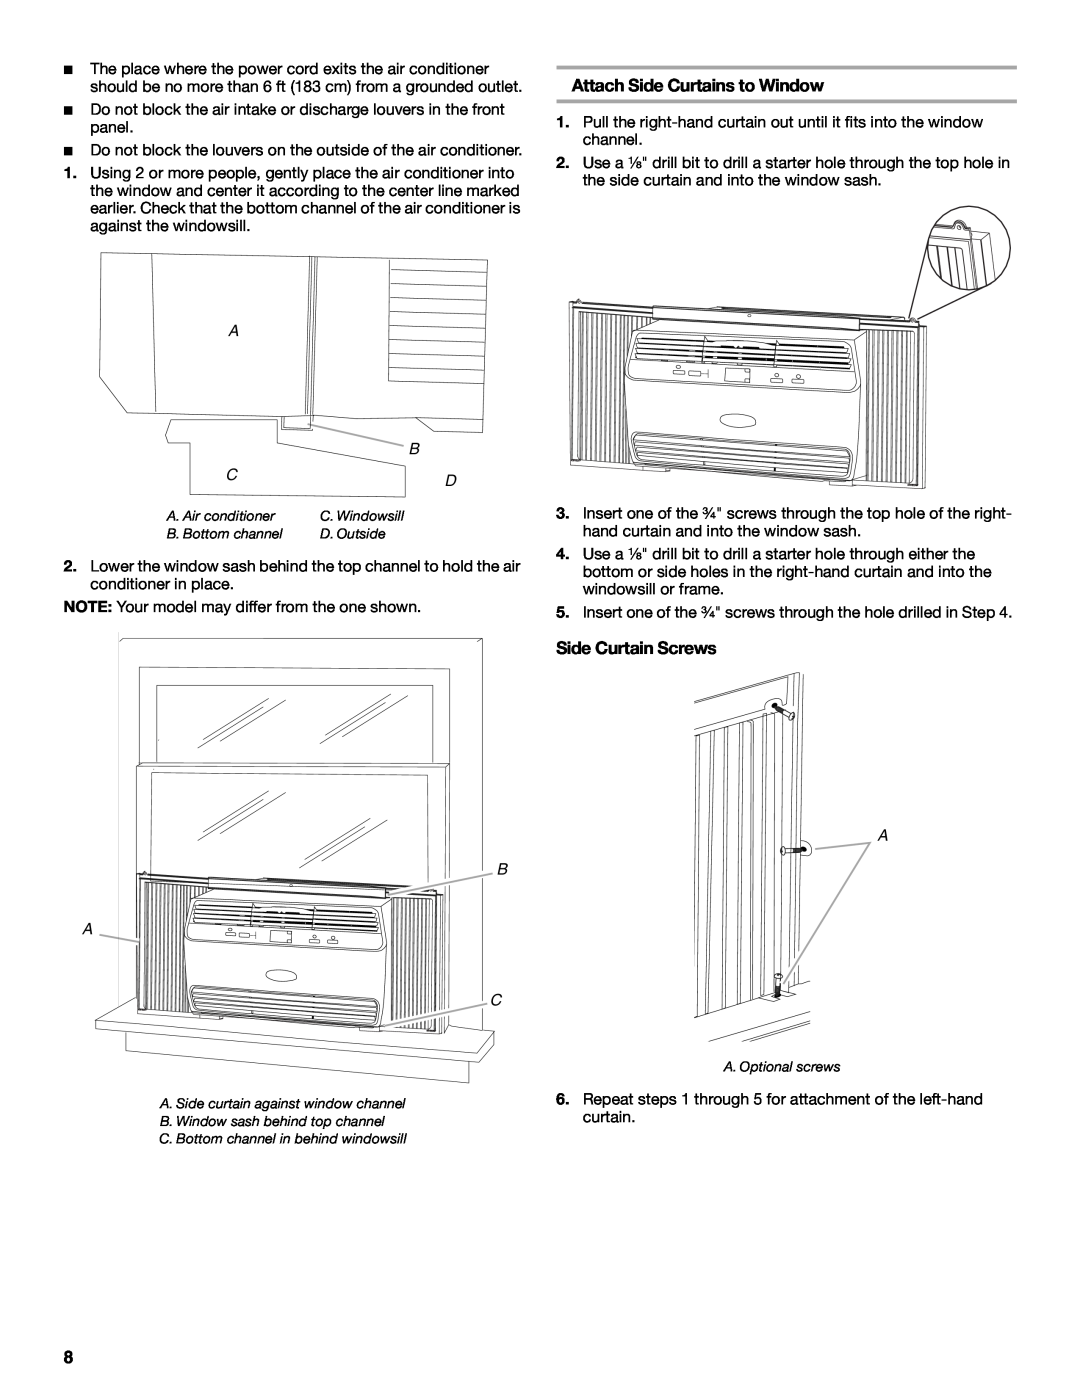 Whirlpool 66161279 manual Attach Side Curtains to Window, Side Curtain Screws, curtain 